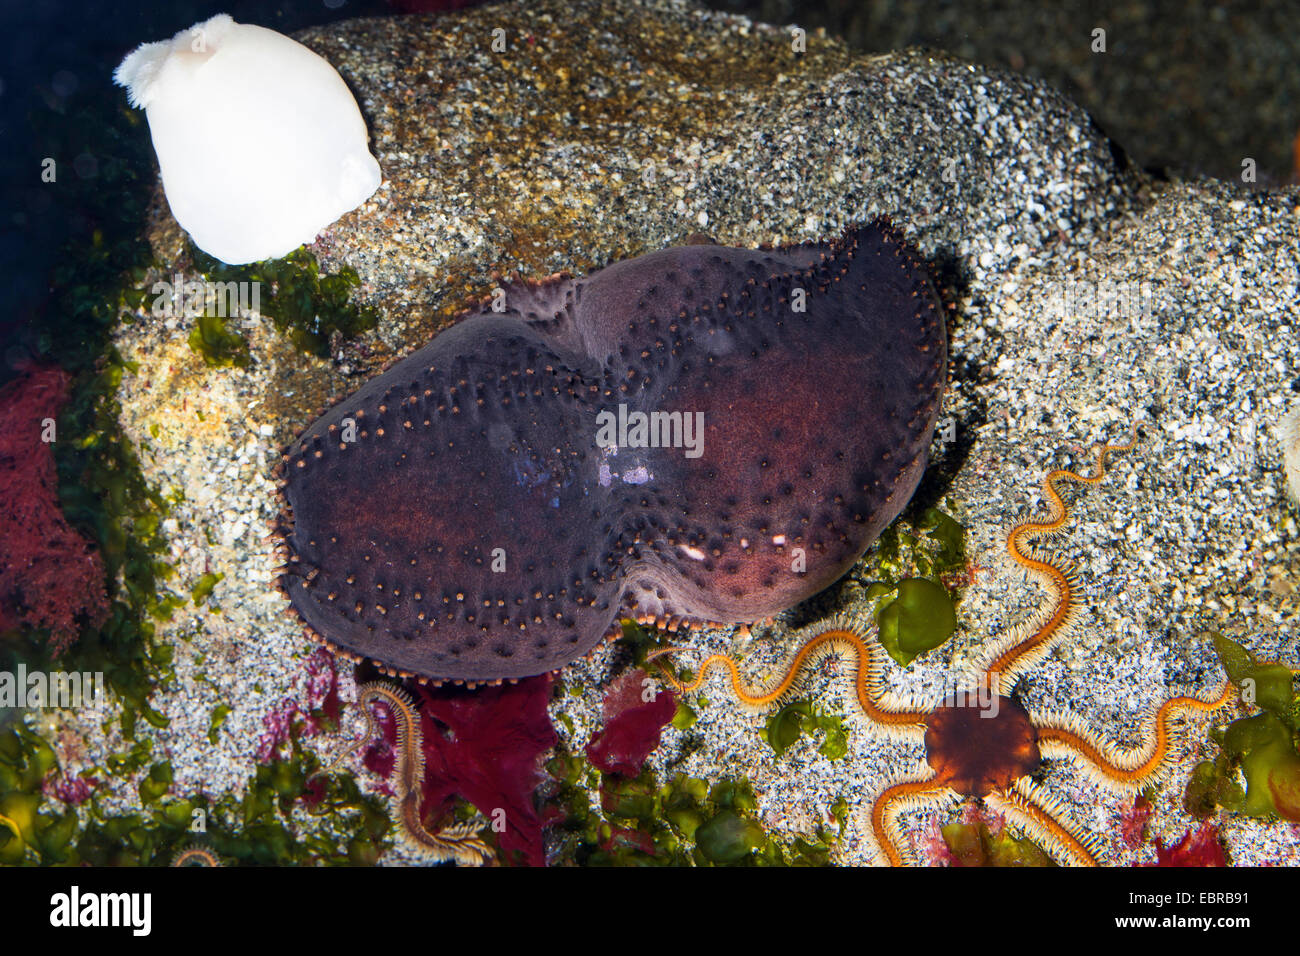 orange-footed sea cucumber, pudding (Cucumaria frondosa), with starfish and rose anemone on a stone Stock Photo